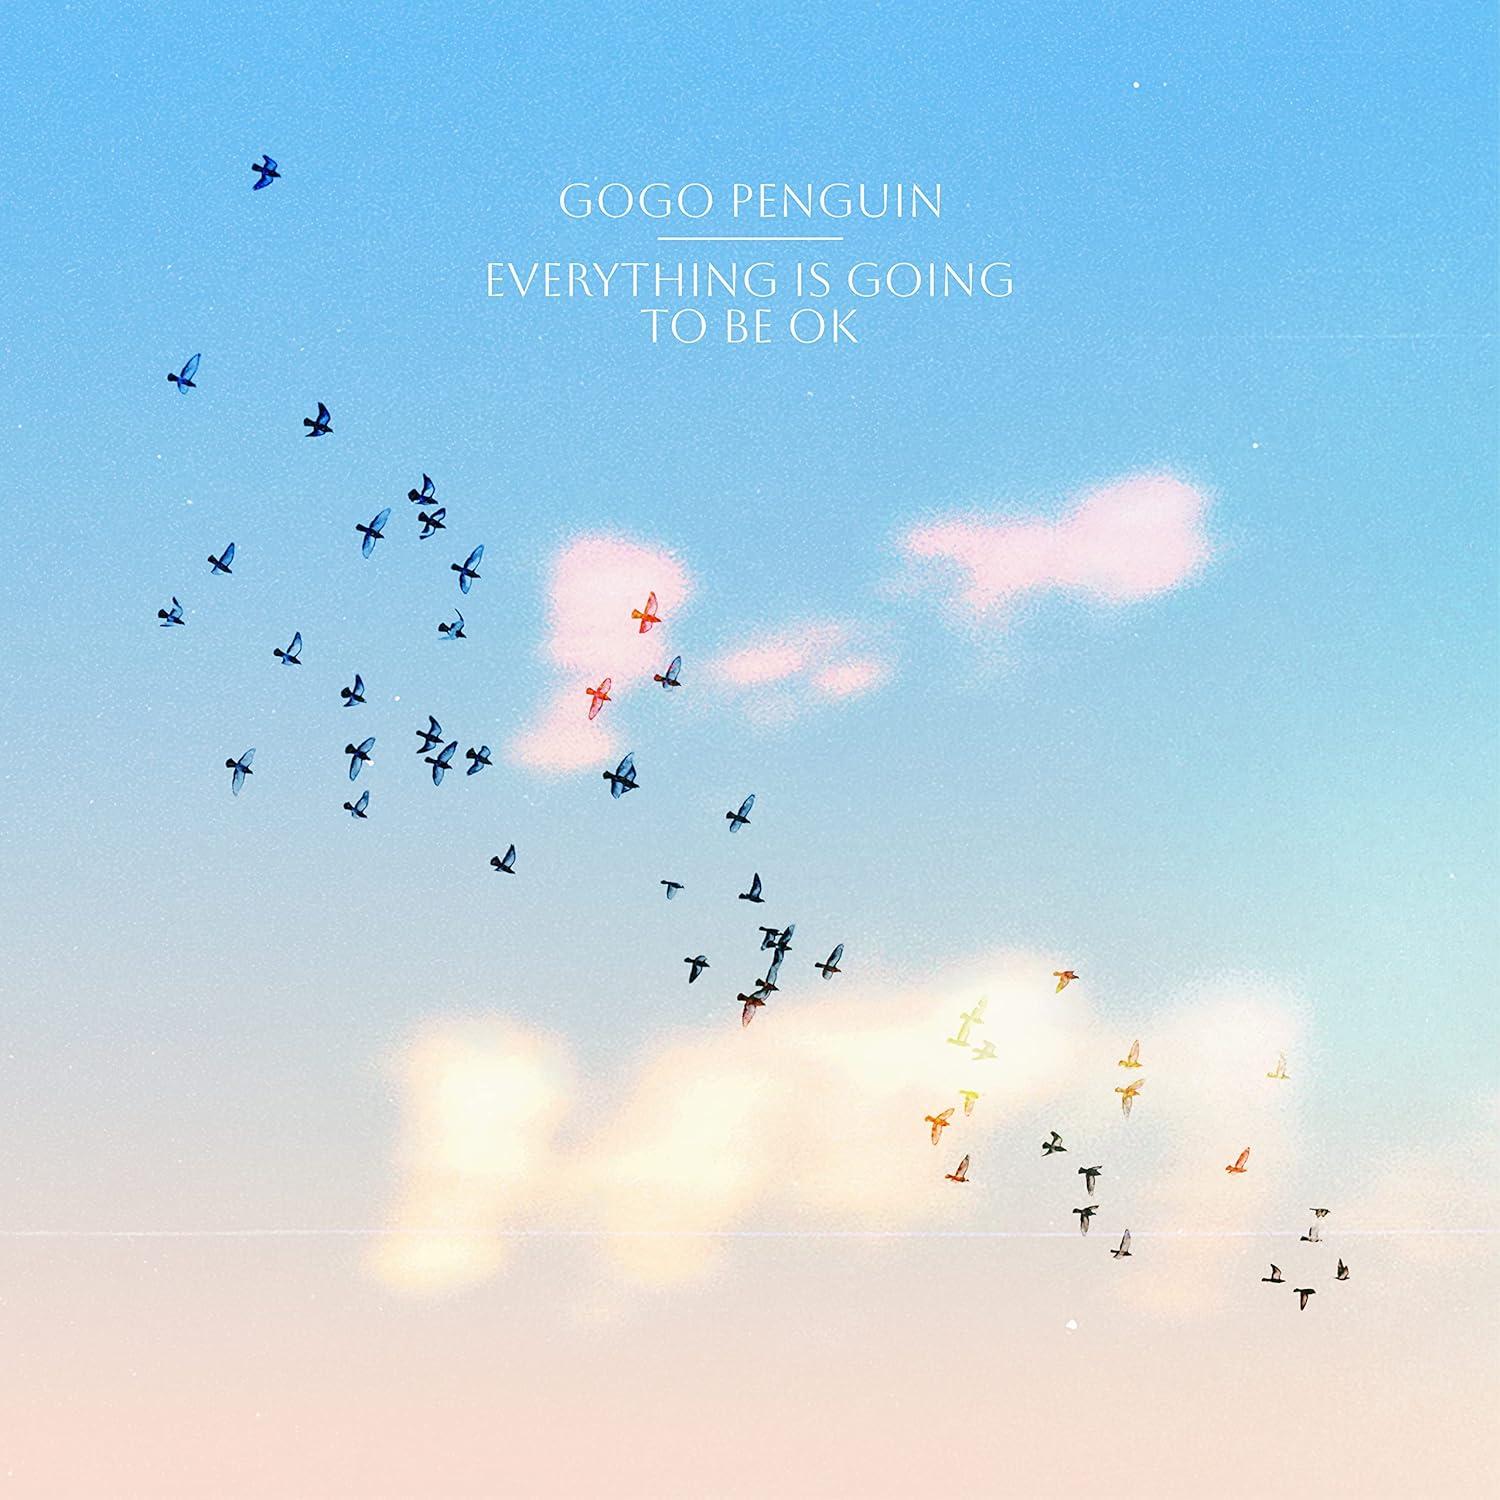 GoGo Penguin live 23.11.: Everything is going to be OK